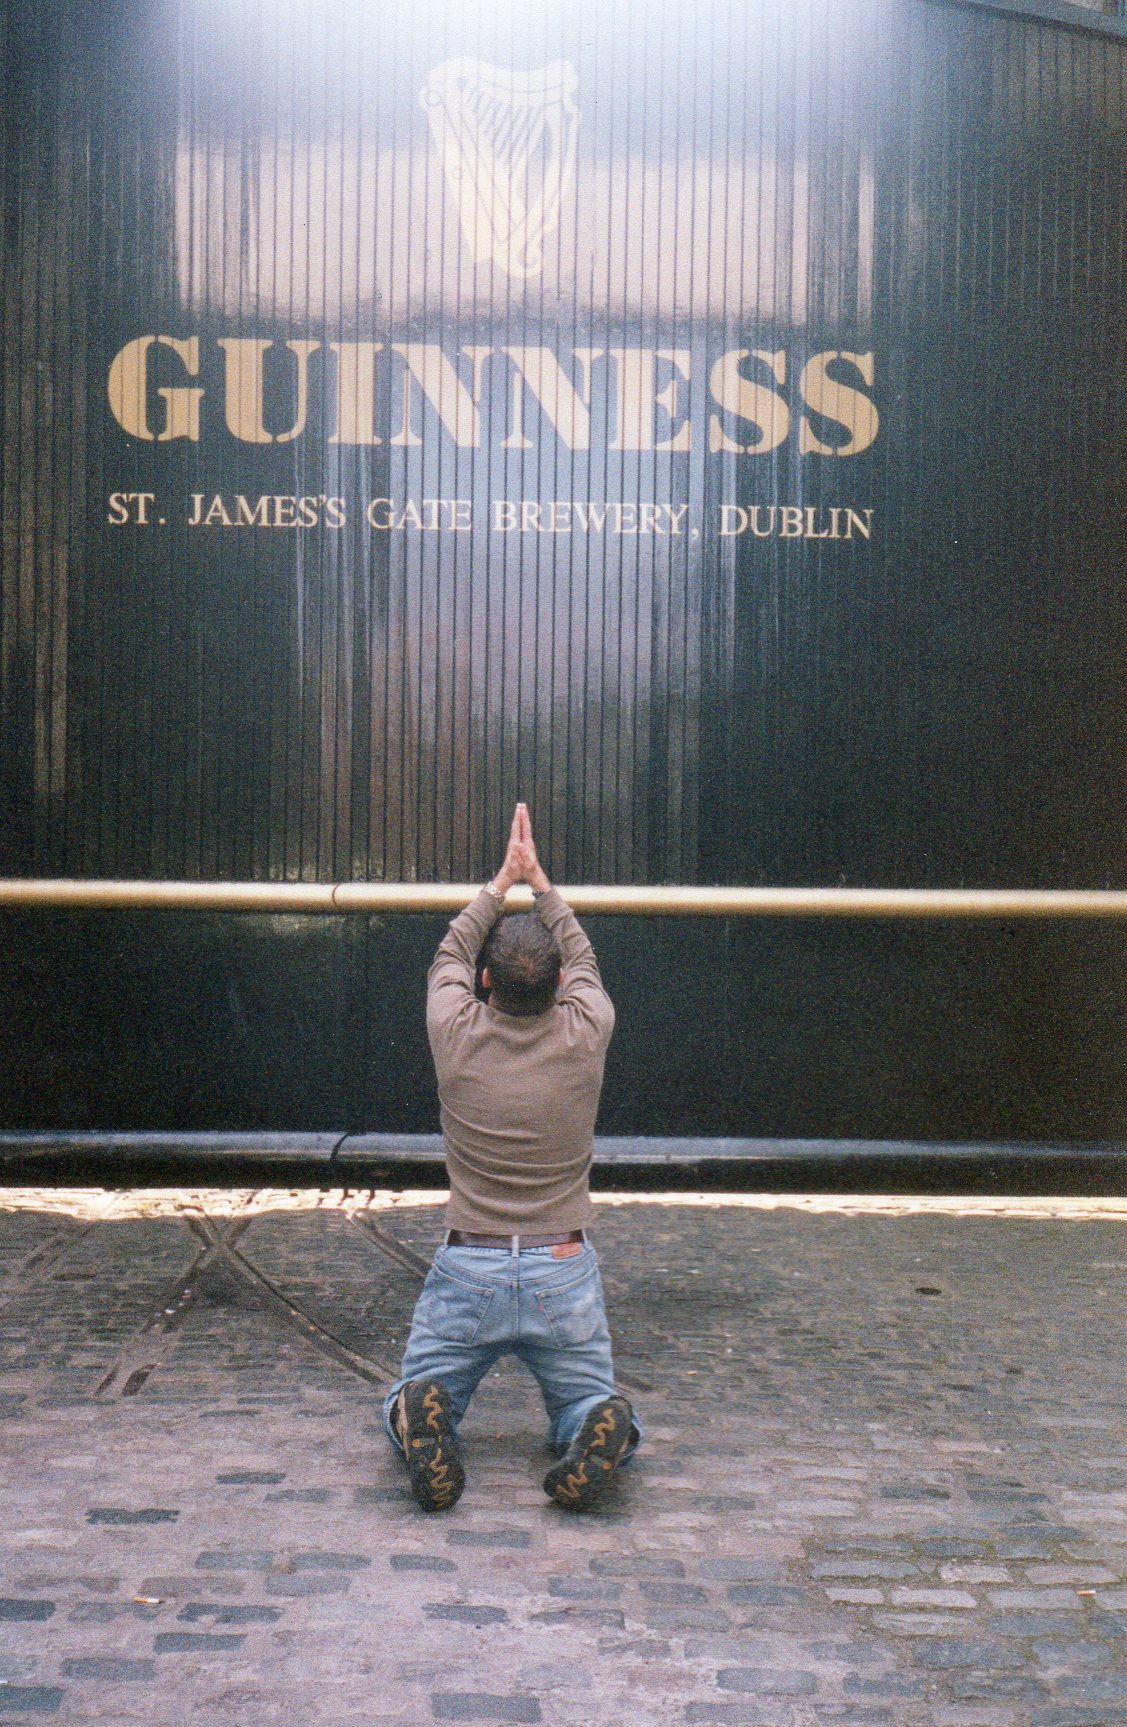 worshipping-at-the-temple-of-guinness001.jpg